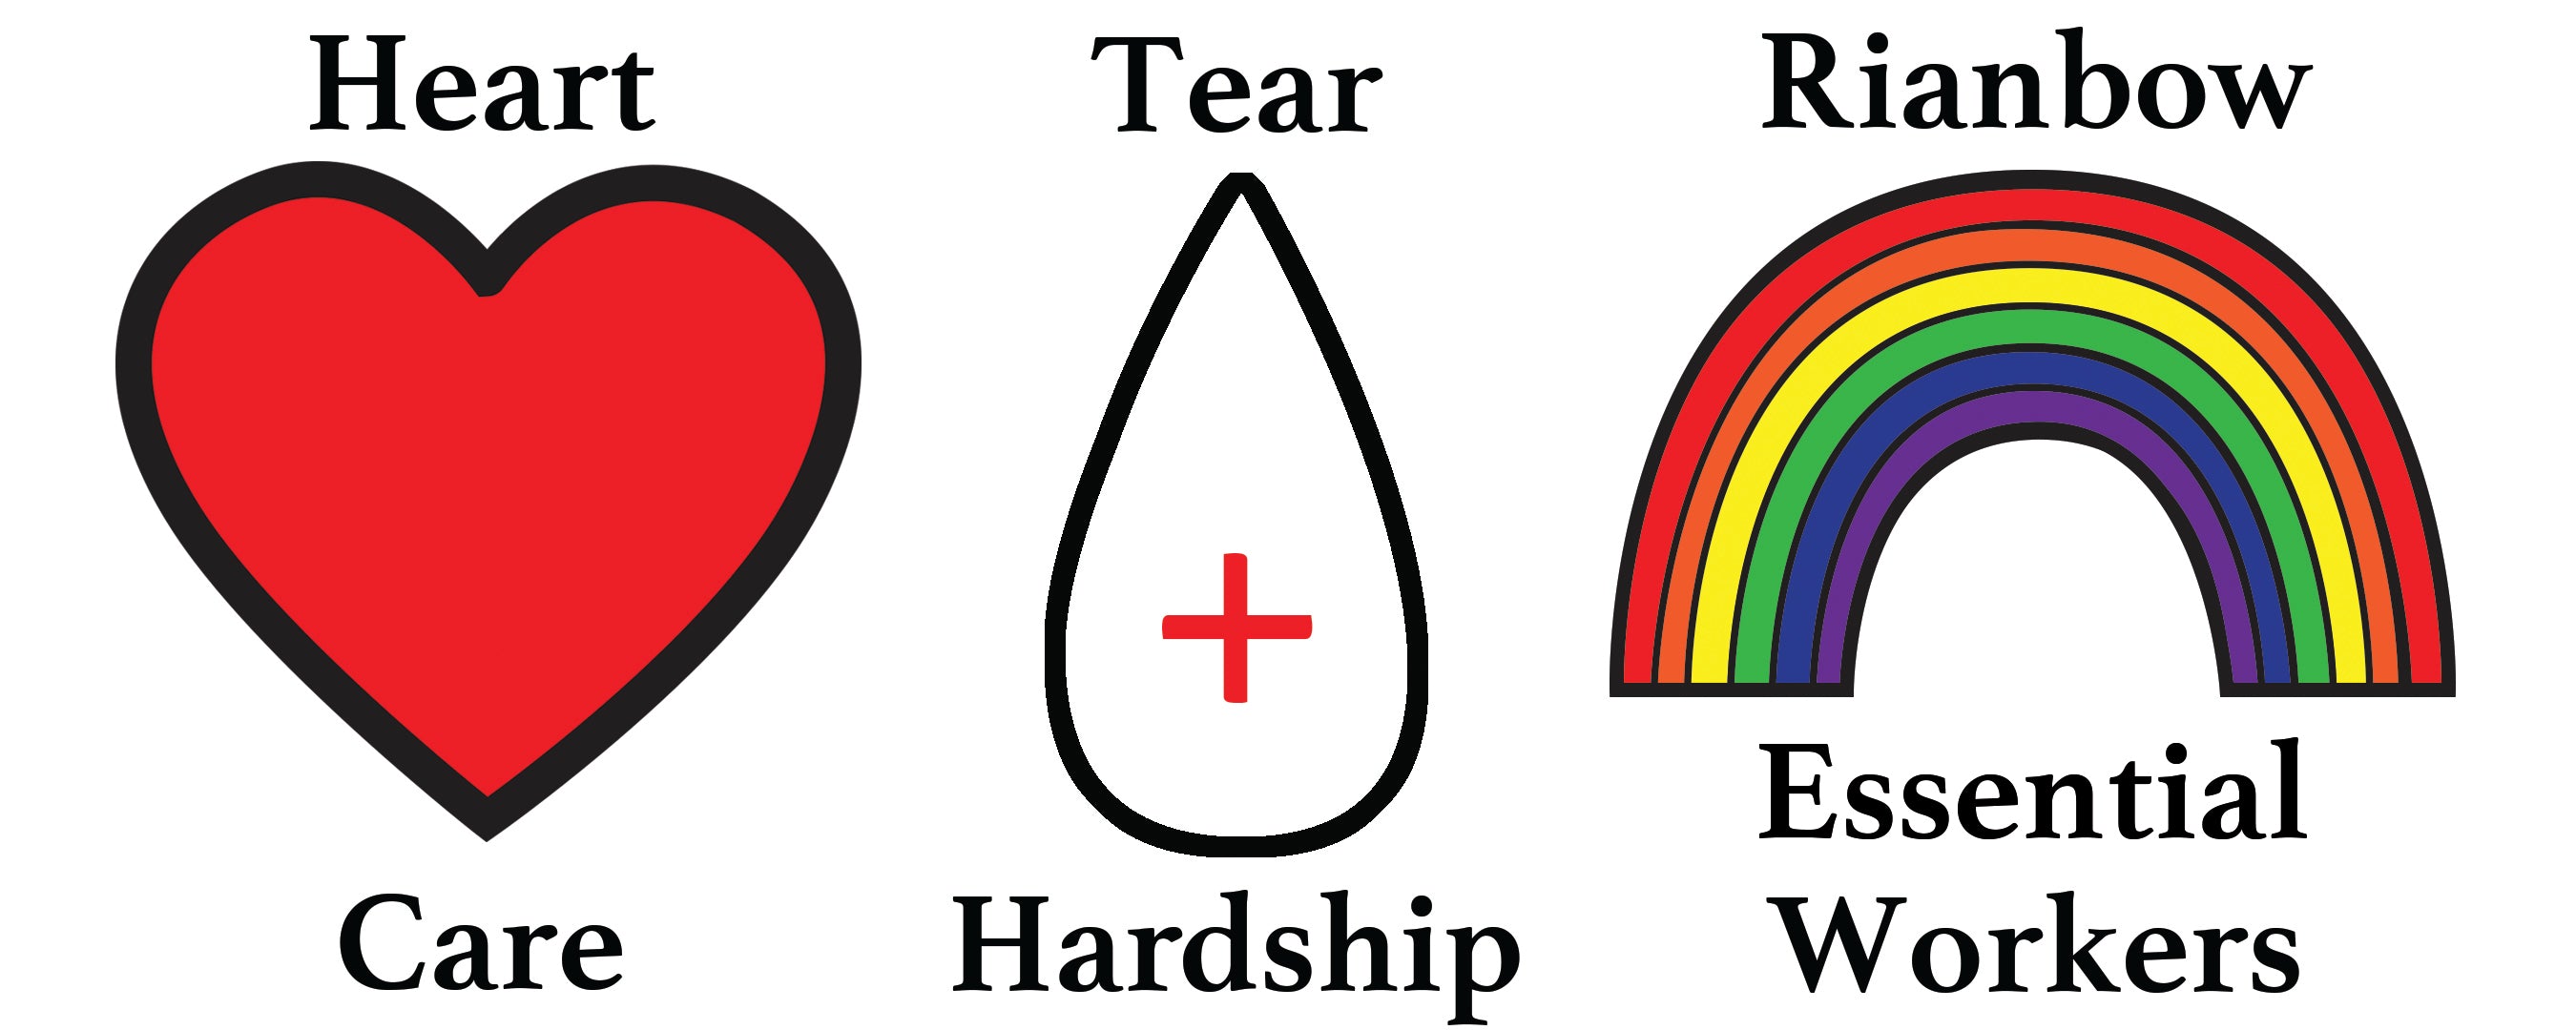 HEART & TEAR GRAPHIC ELEMENTS